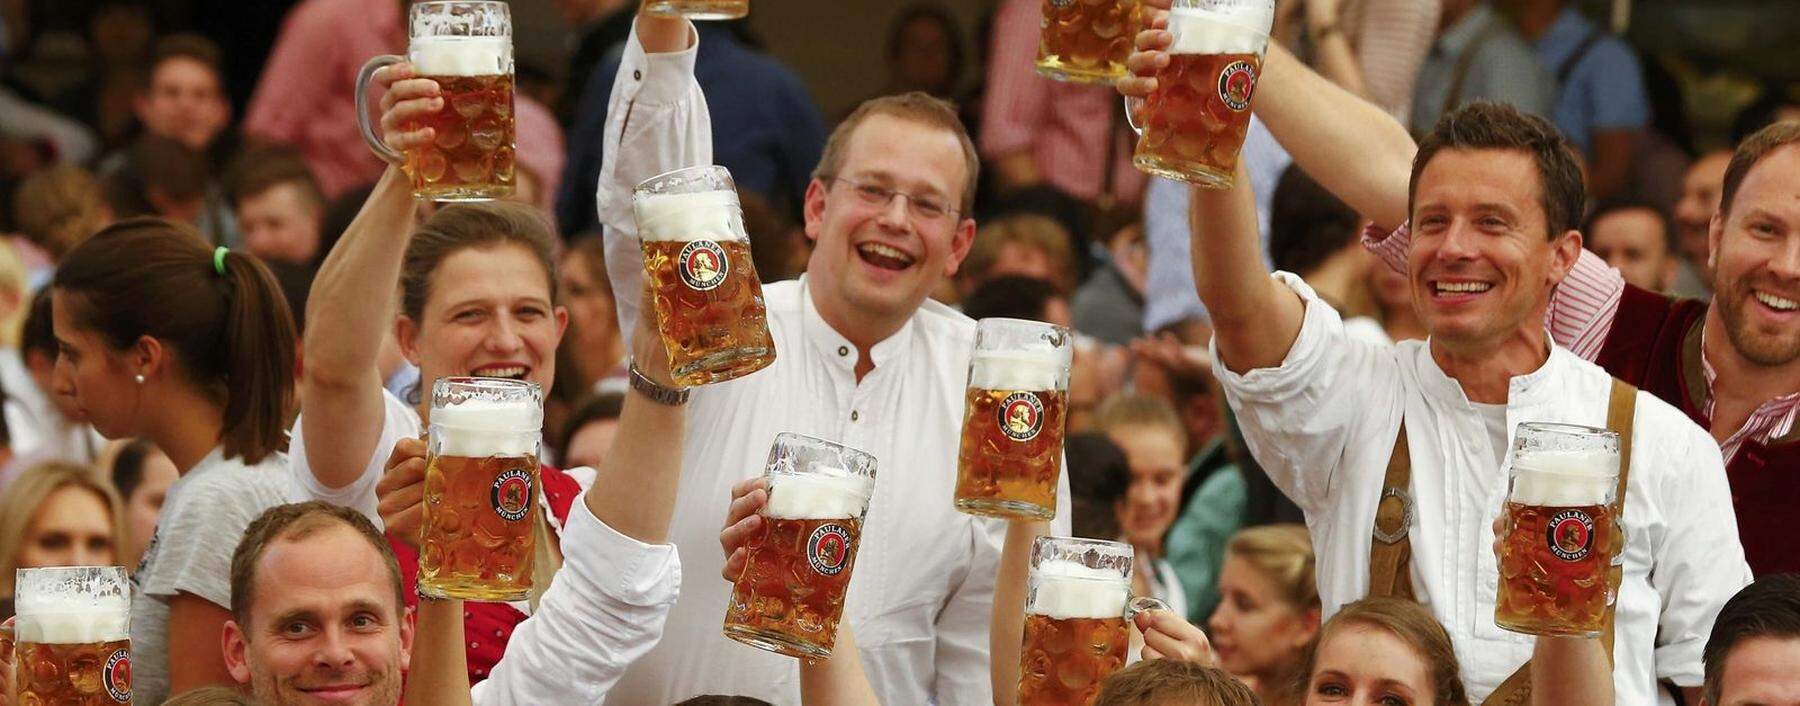 FILE PHOTO: A waiter carries glasses of beer during the opening day of Oktoberfest in Munich